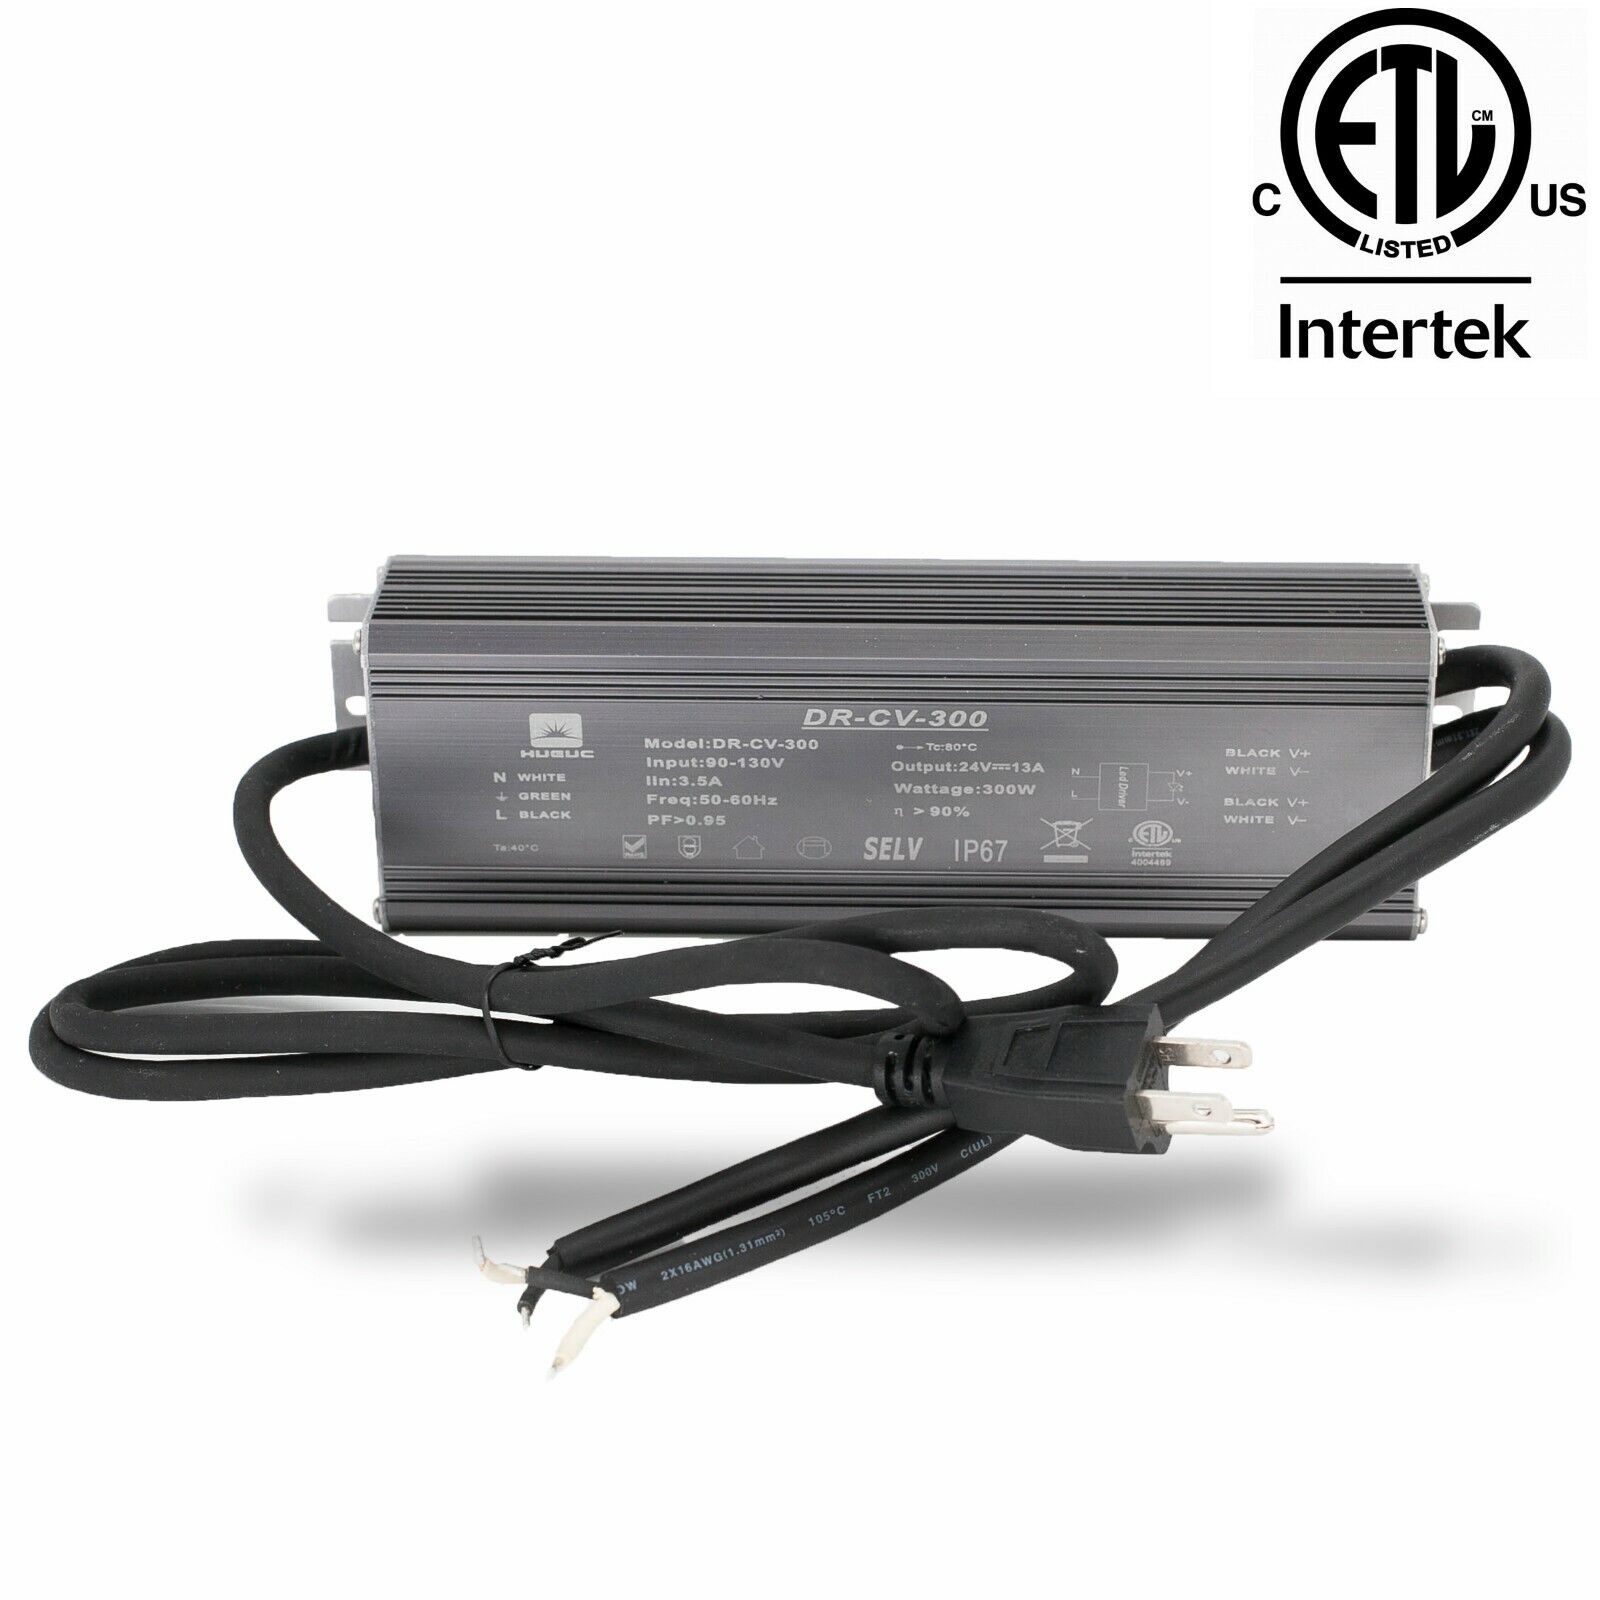 ETL LISTED 24v 12.5A 300w LED Light Power Supply Driver Waterproof + AC Plug Connectors: AC plug and output dual wire - Click Image to Close